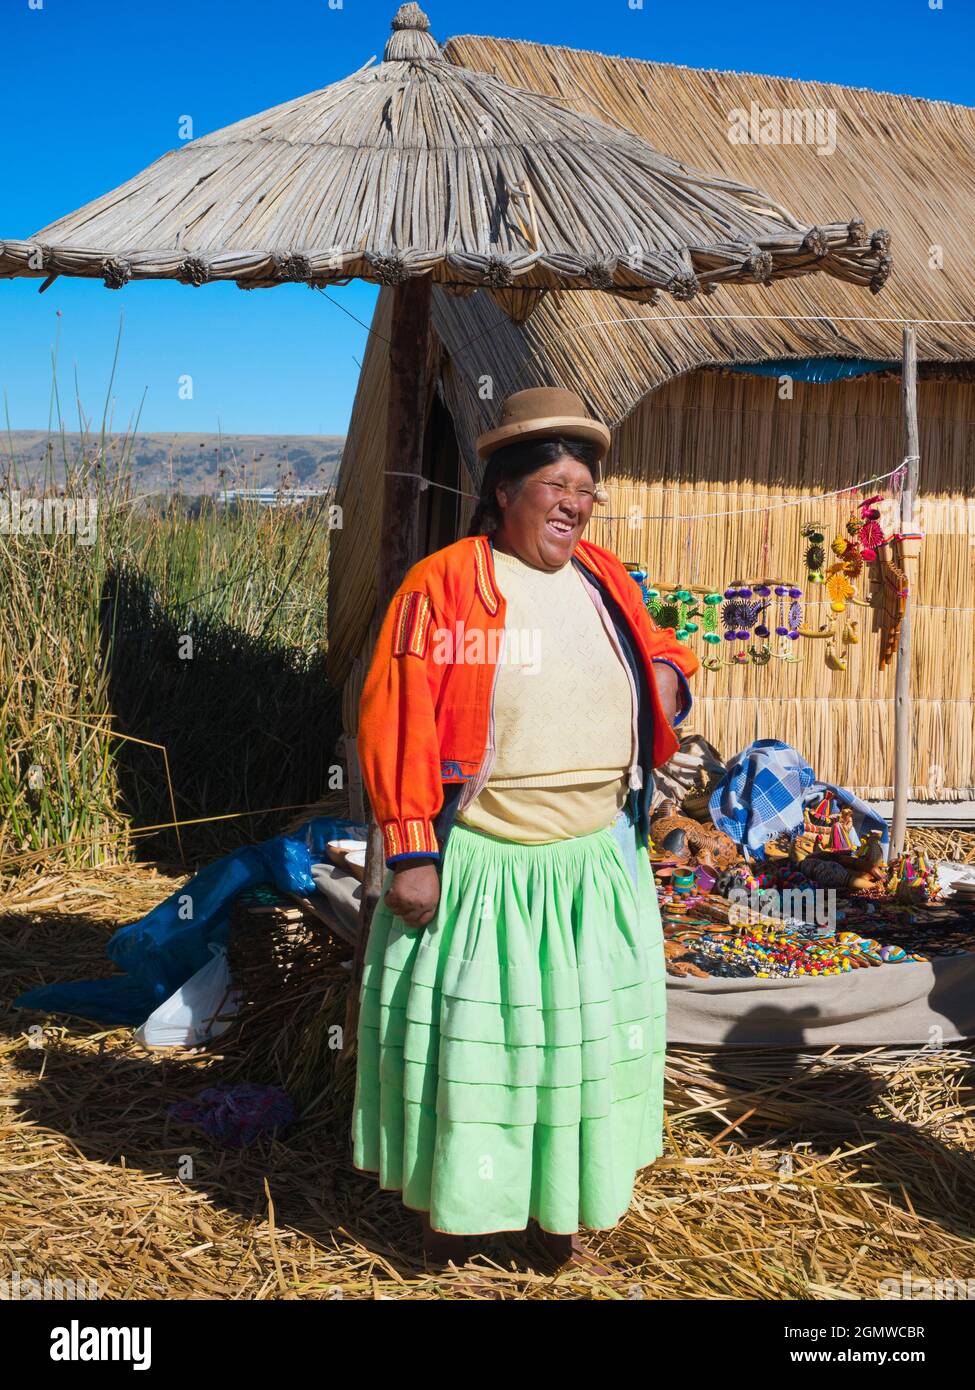 Lake Titicaca, Peru - 17 May 2018; one native person in shot   Situated at 3,812 metres (12,507 ft) elevation, the beautiful, jewel-like Lake Titicaca Stock Photo